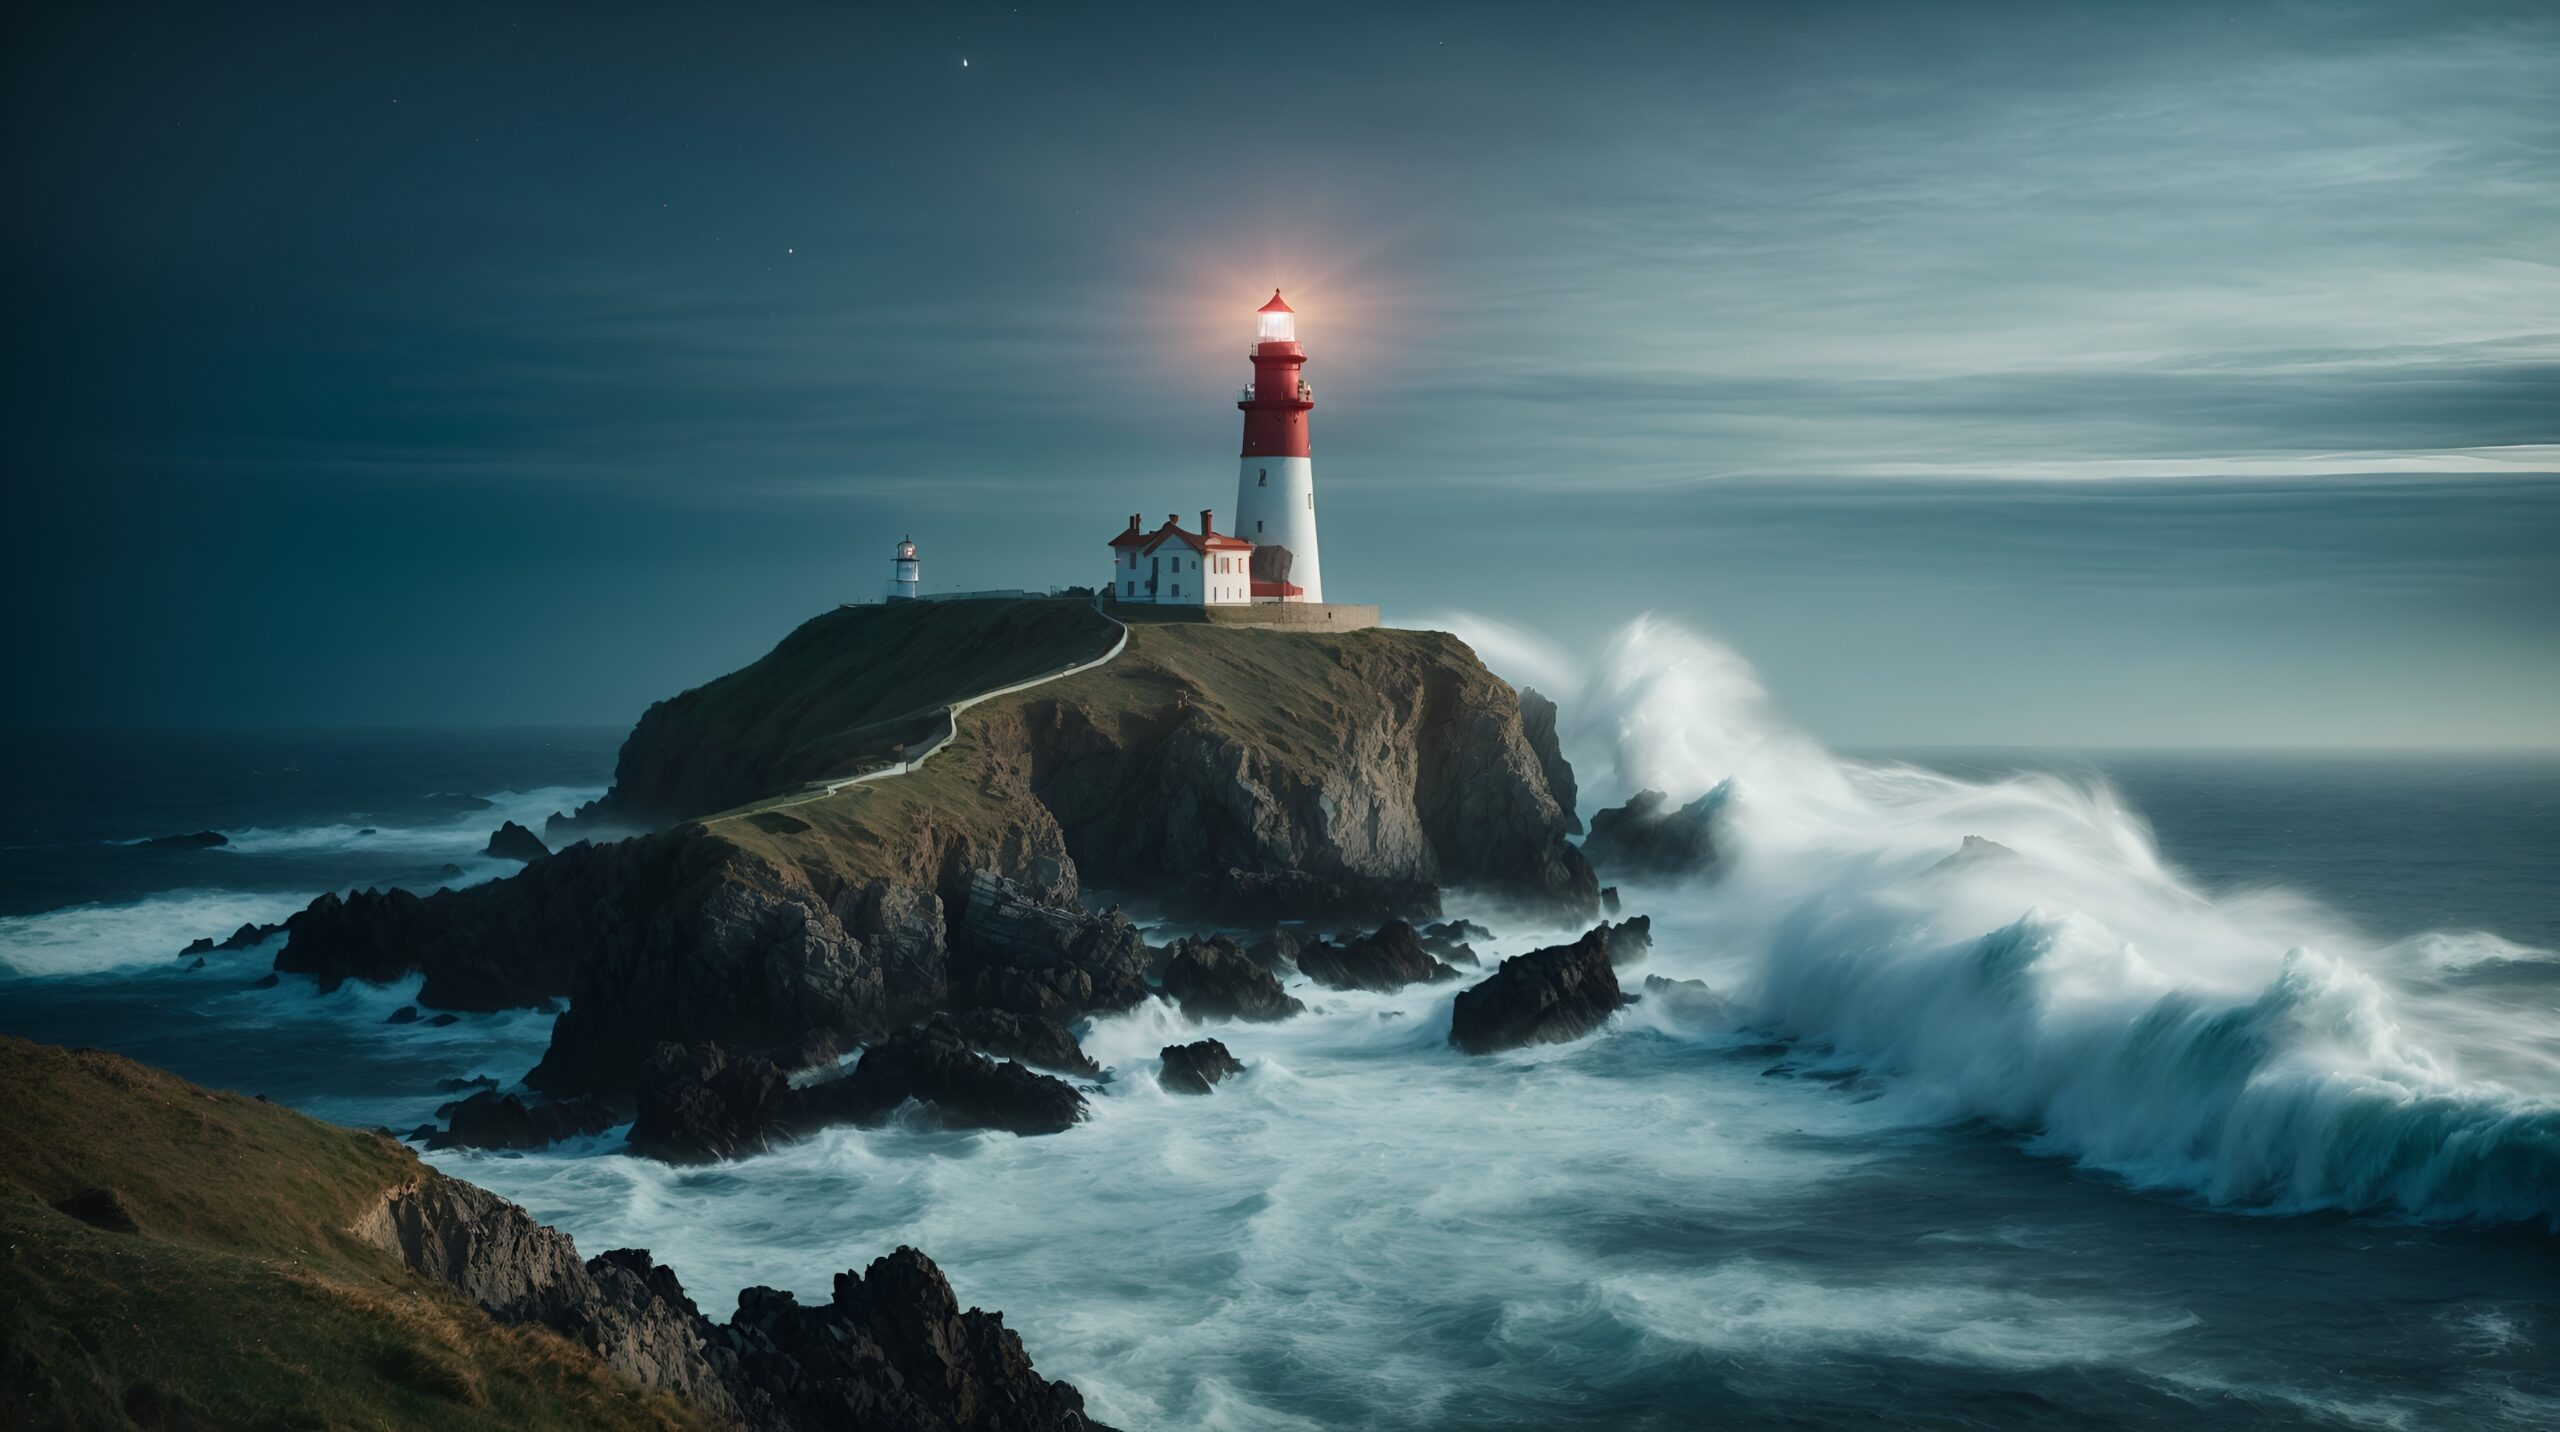 A solitary lighthouse perched on a rugged cliff